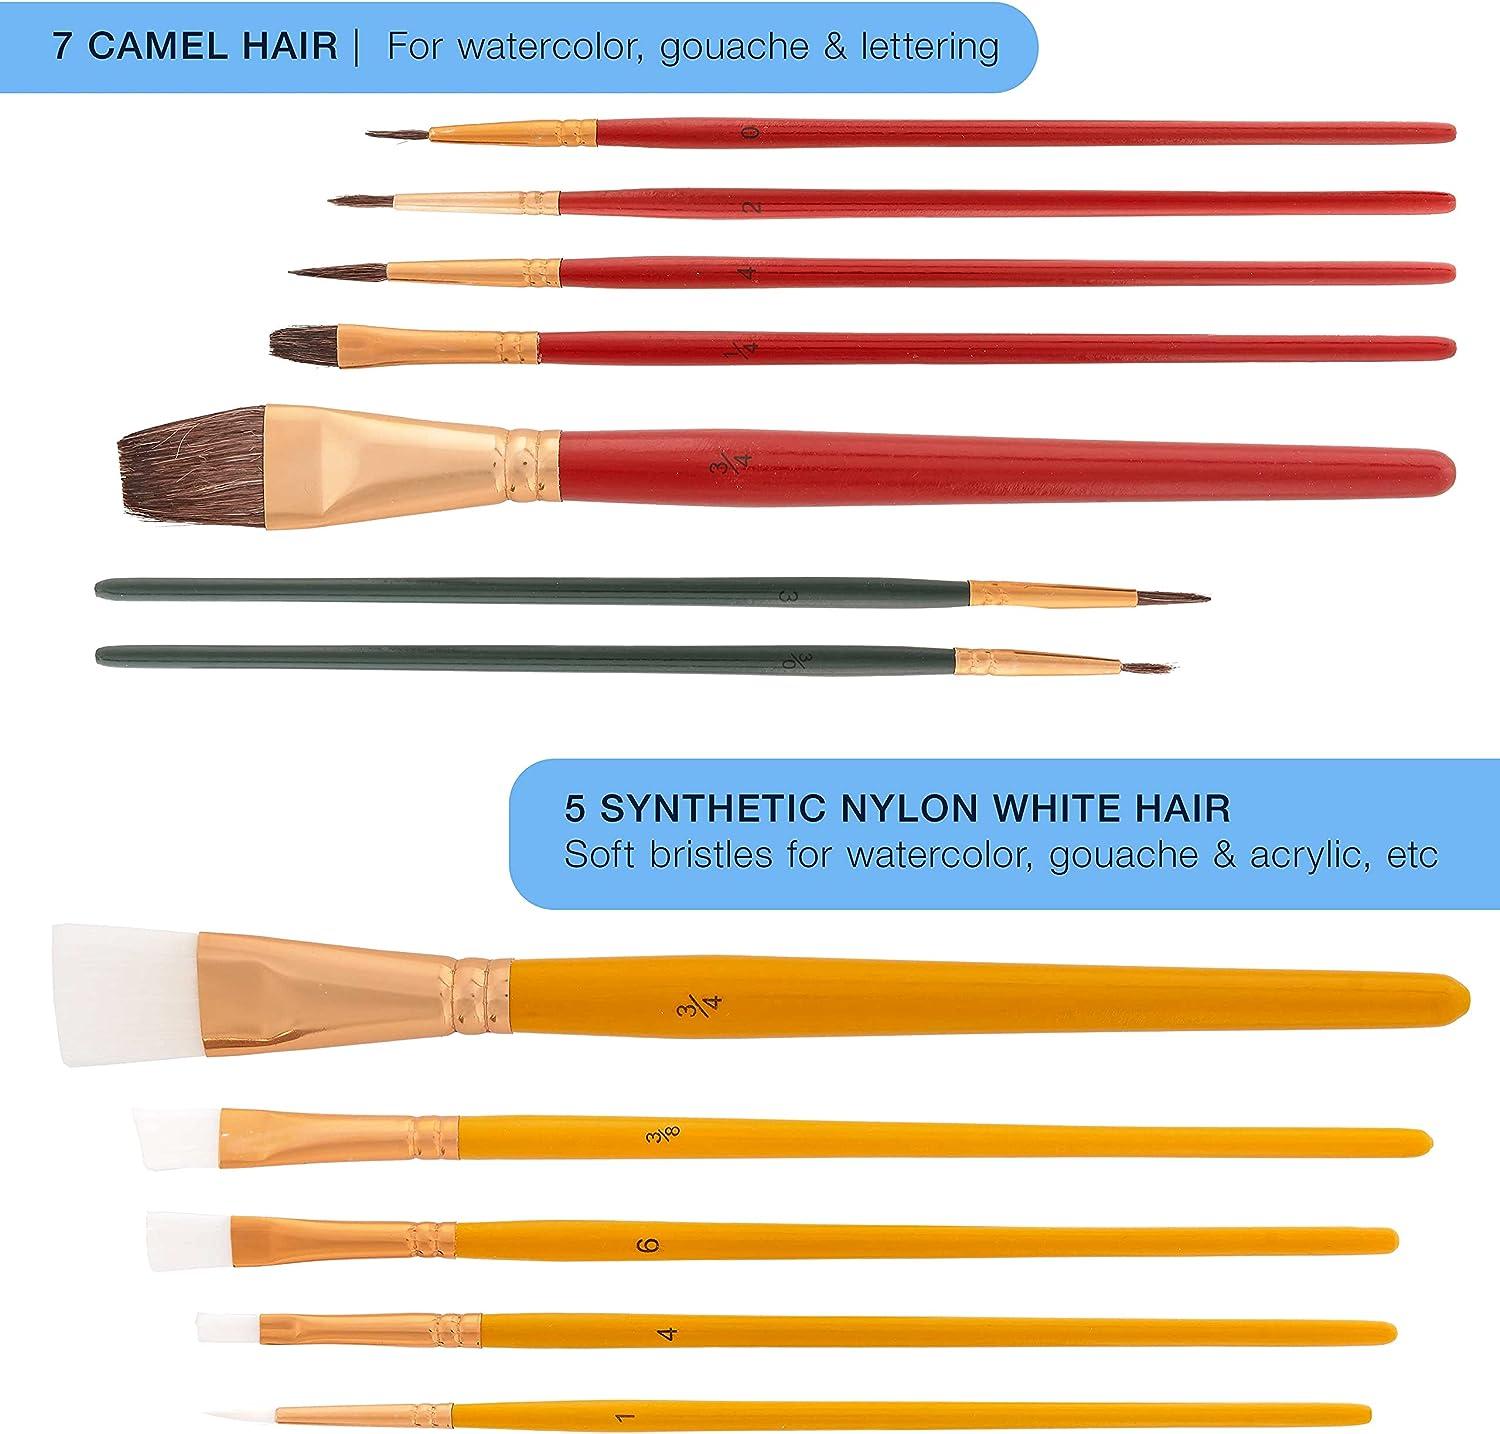 Nine different paint brushes, including round, flat